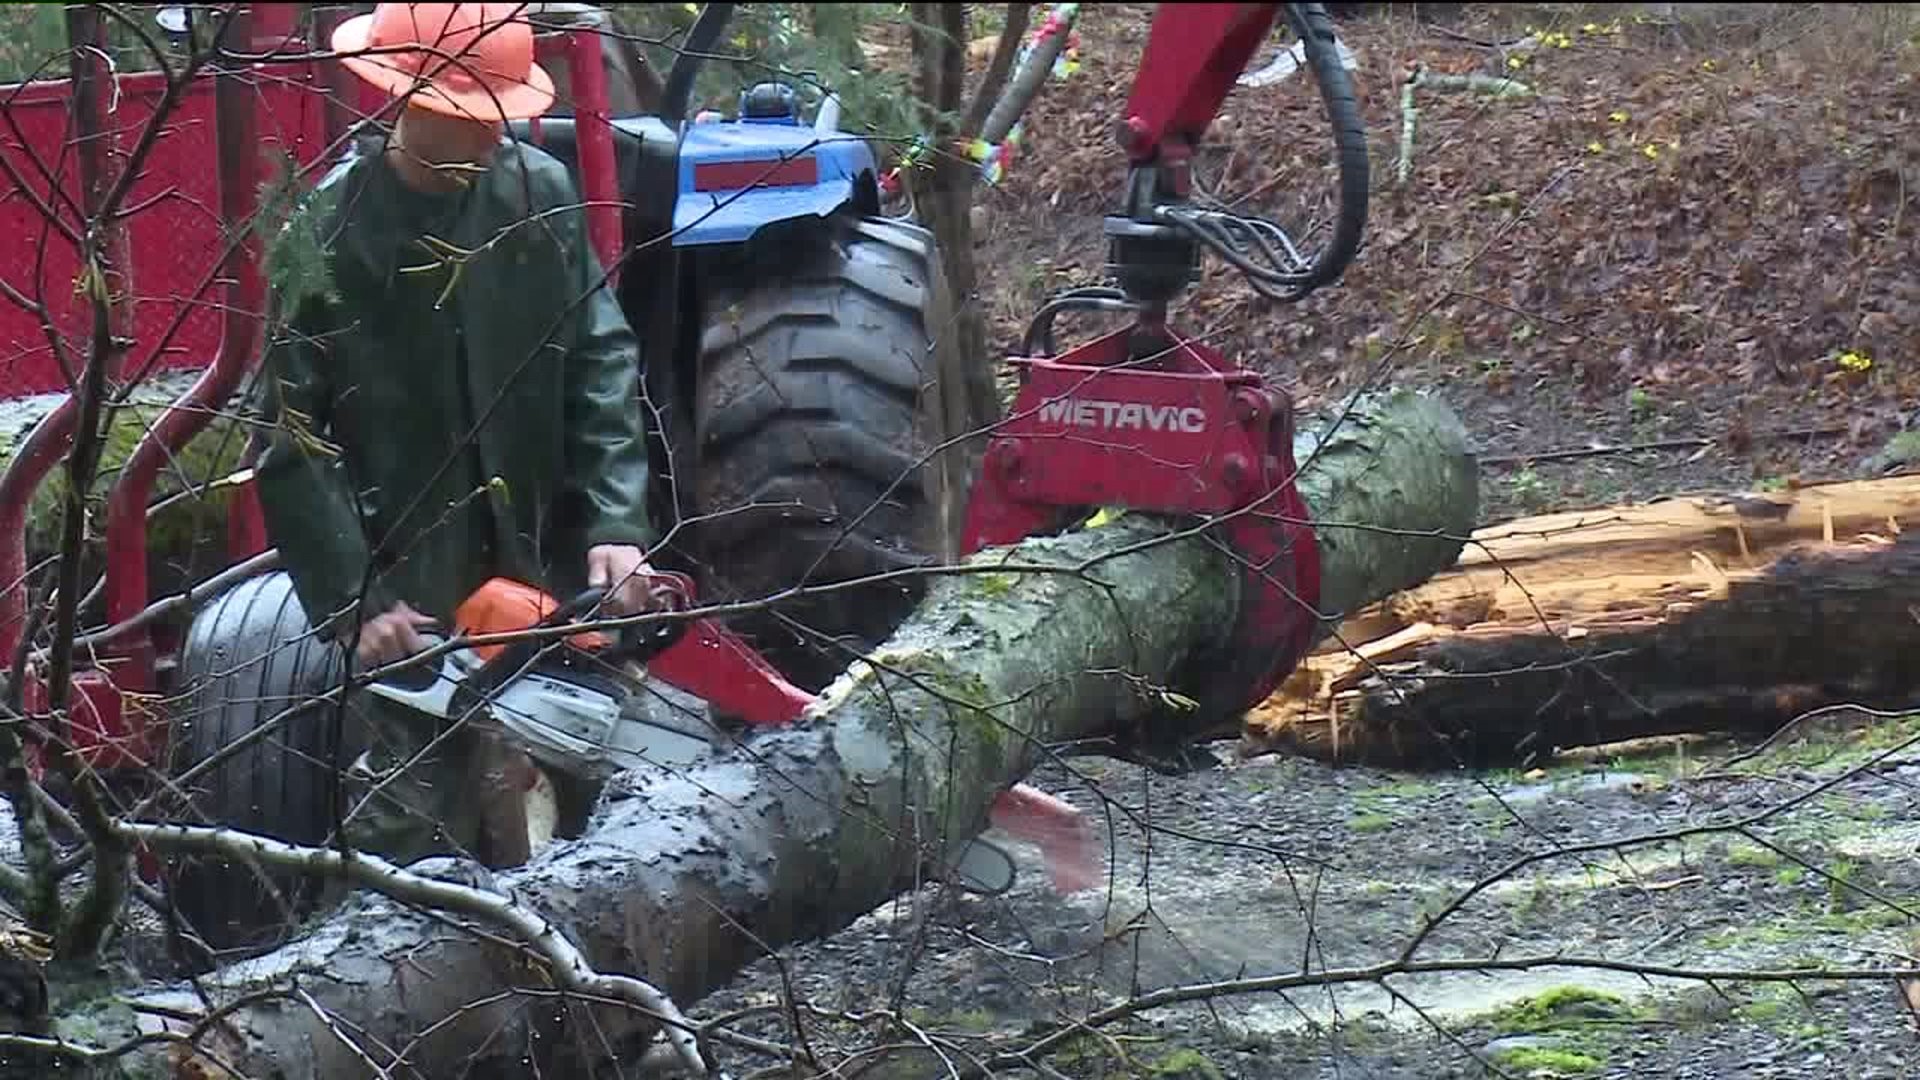 Cleanup Efforts Facing Problems in Wayne County